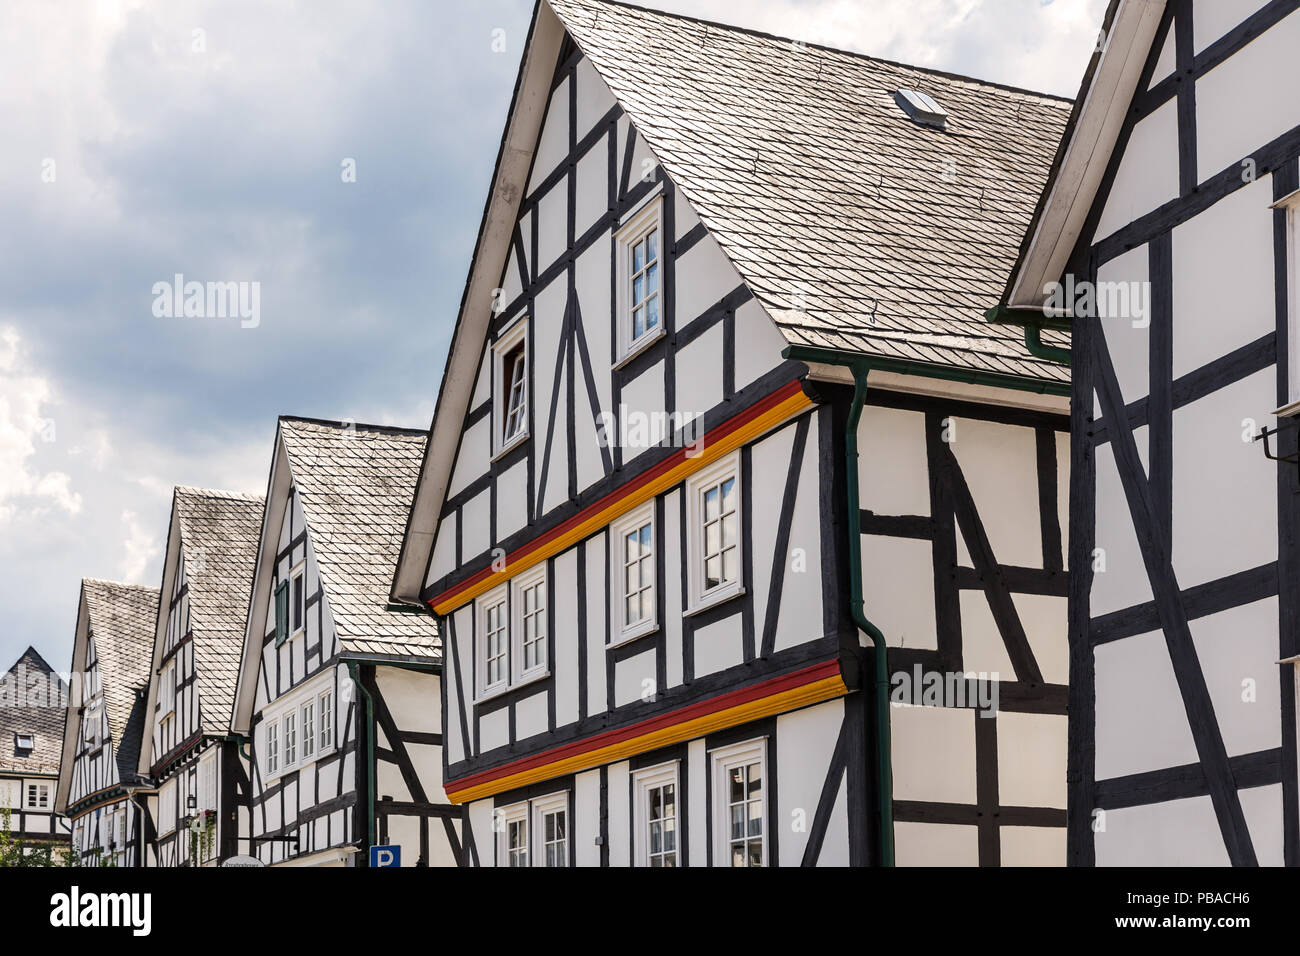 german timbered houses in freudenberg germany Stock Photo